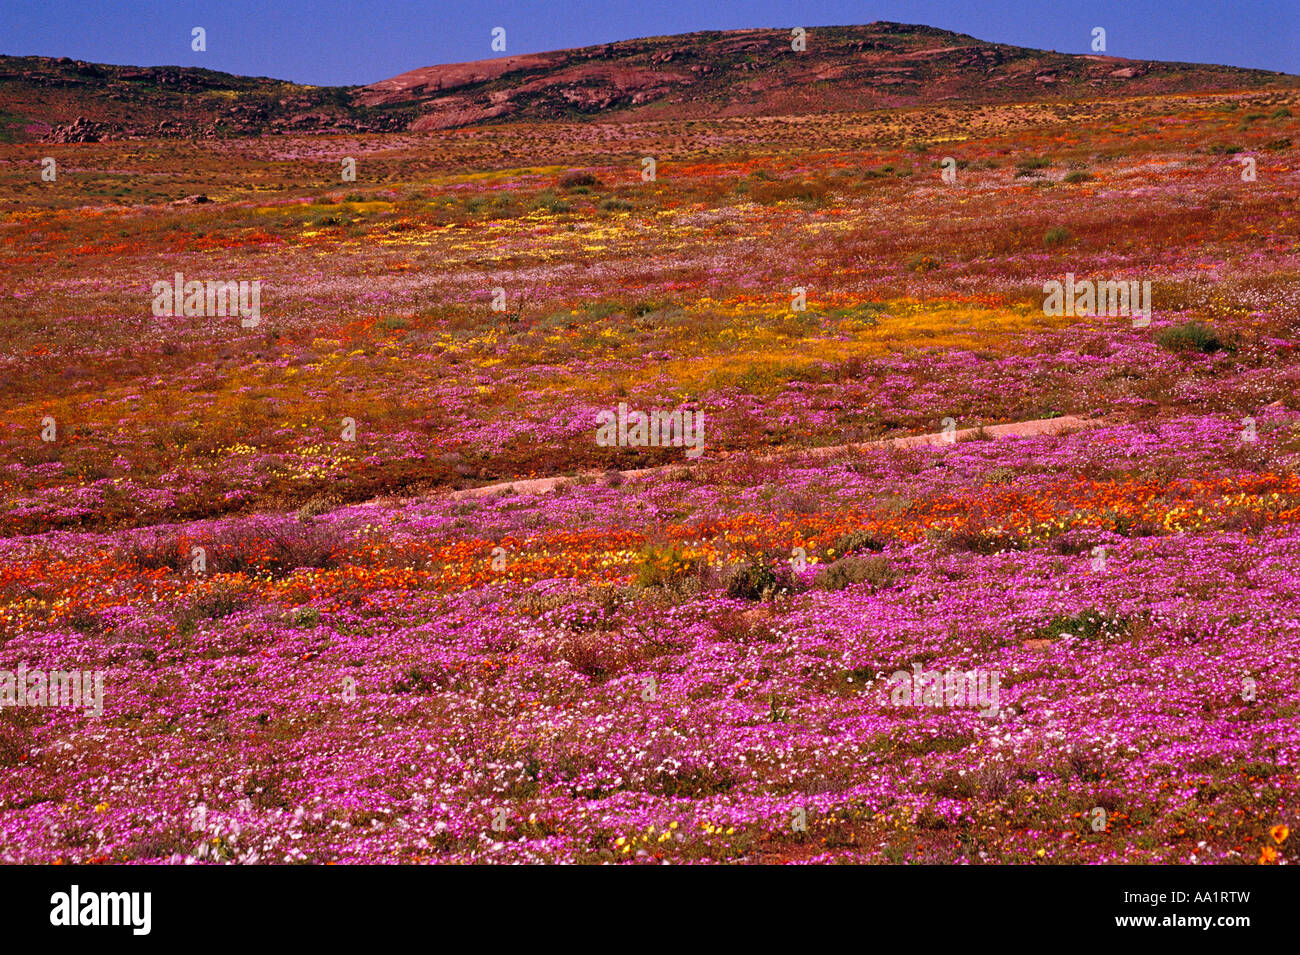 Field of Wild Flowers, Namaqualand, Northern Cape, South Africa Stock Photo